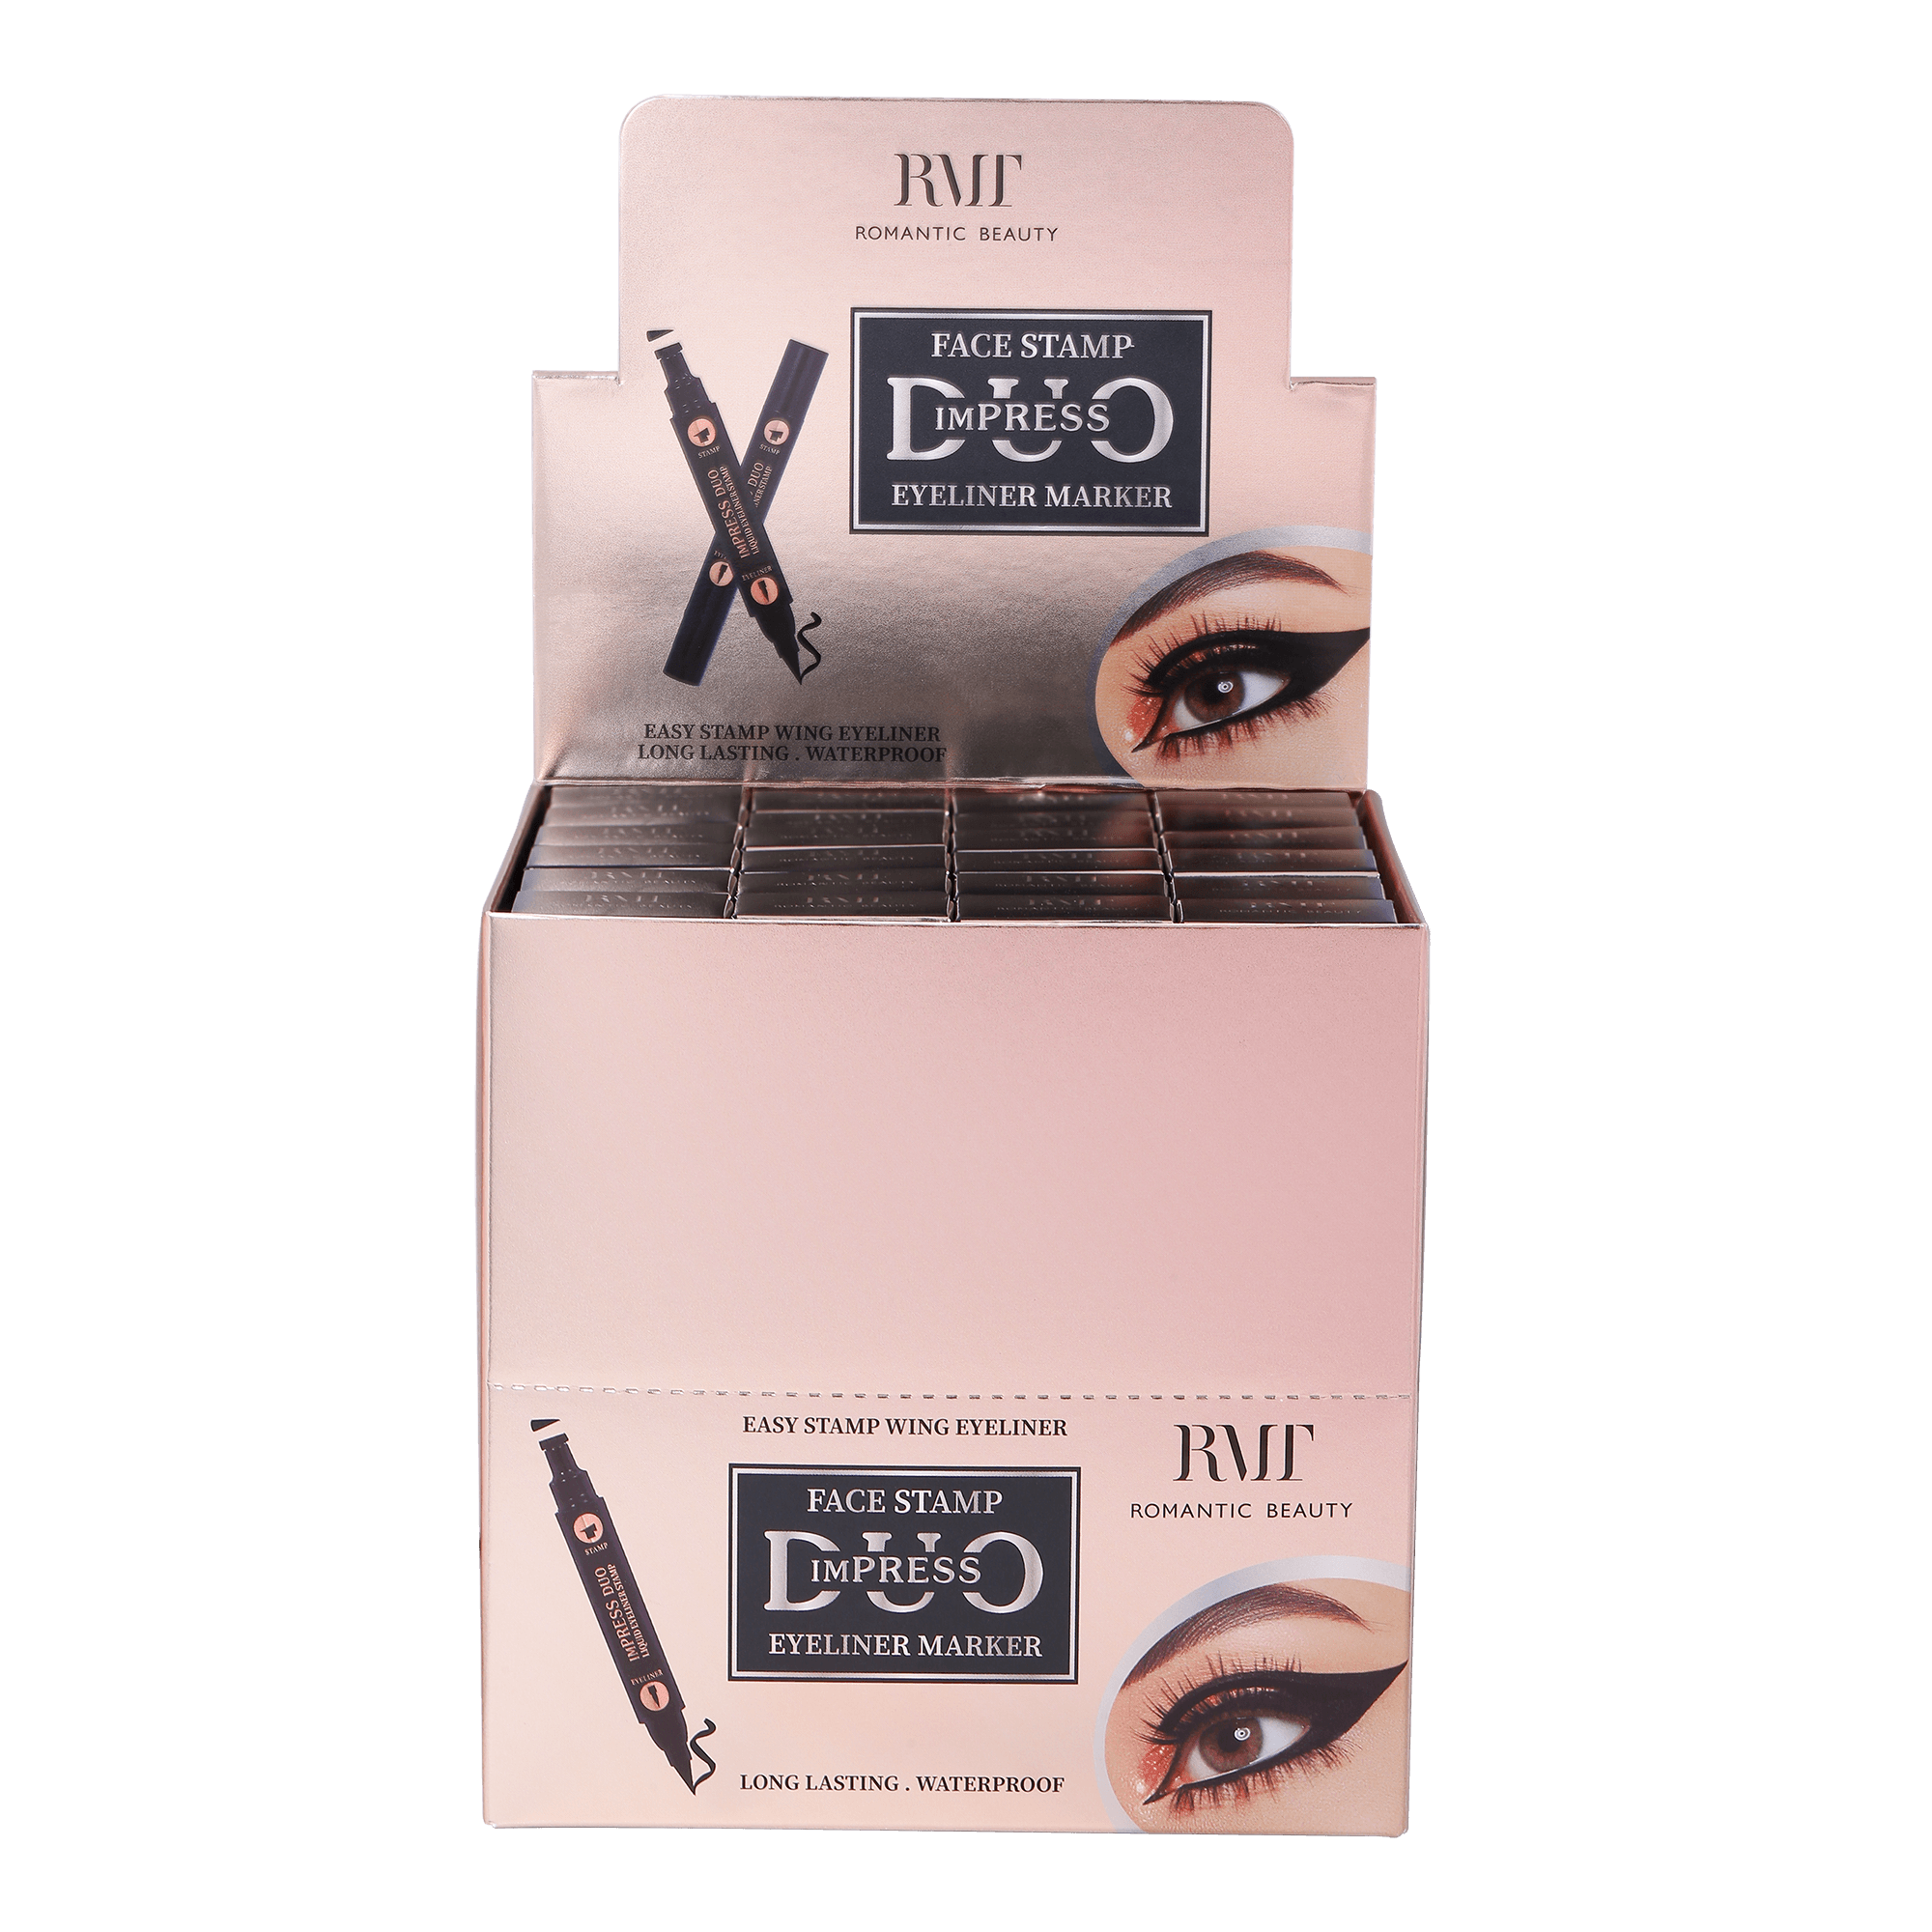 Pack 24 unidades DELINEADOR FACE STAMP IMPRESS  DUO